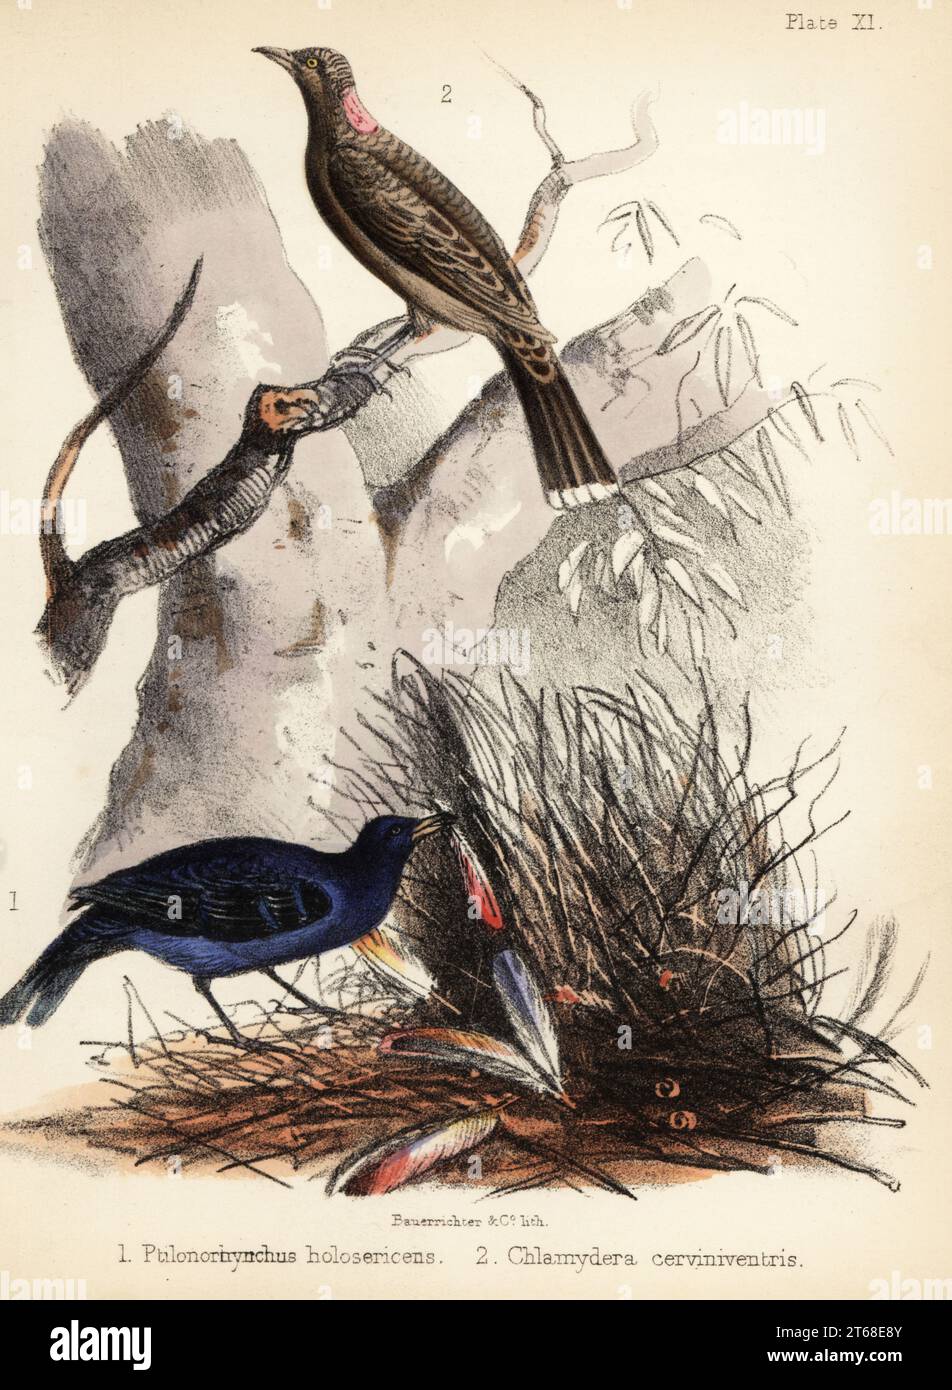 Satin bowerbird, Ptilonorhynchus violaceus, building a nest 1 and fawn-breasted bowerbird, Chlamydera cerviniventris 2. Handcoloured lithograph by Bauerrichter from Adam Whites Popular History of Birds, Lowell Reeve, Covent Garden, London, 1855. Stock Photo